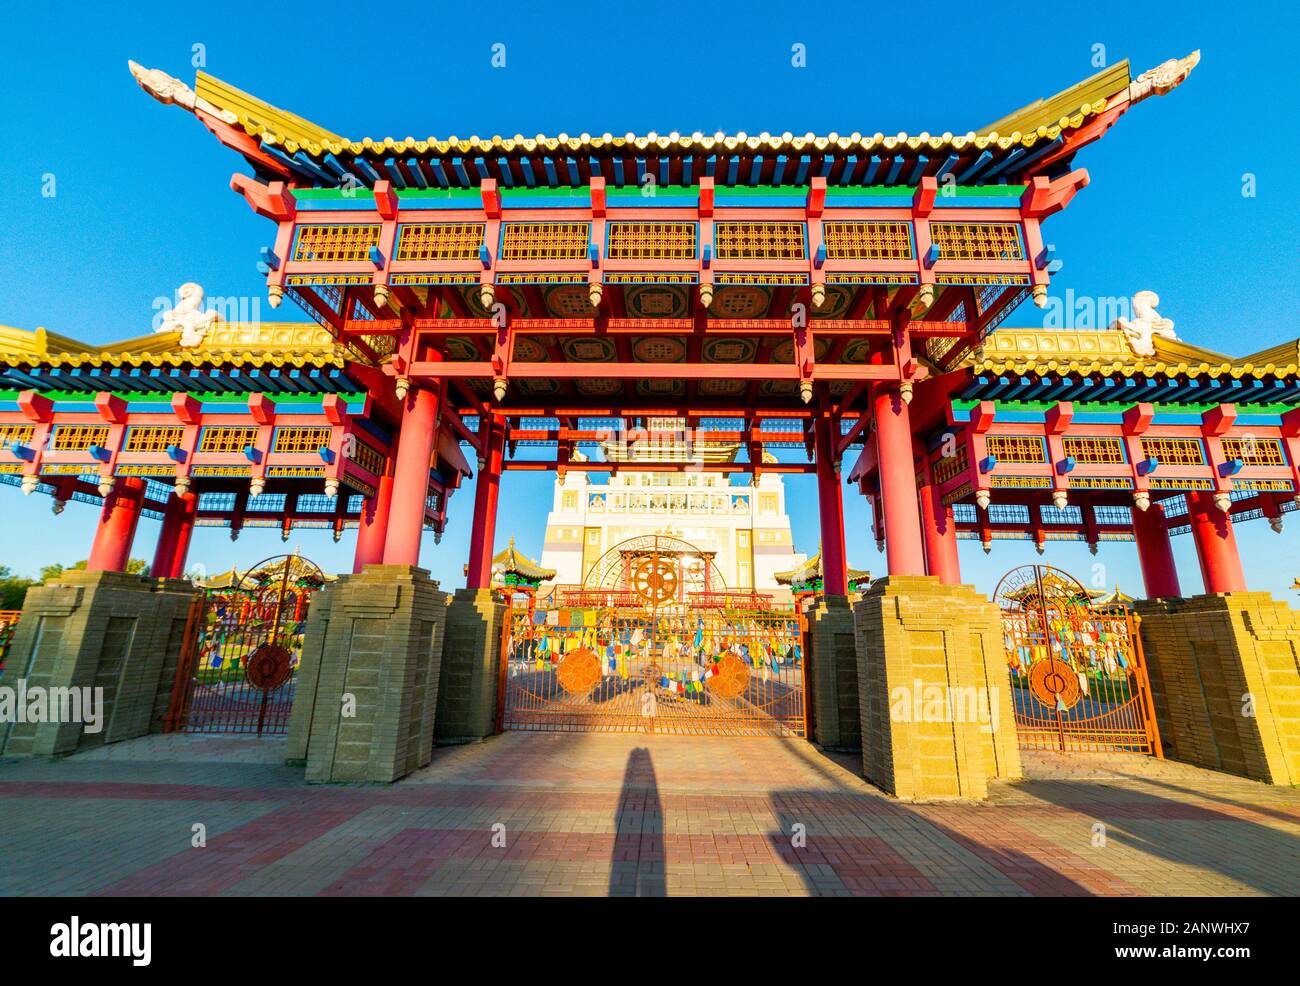 Gate to the Buddhist temple. Om mani padme hum or O, the jewel in the lotus, the mystic formula of the Tibetans and nothern Buddhists used as a charm. Stock Photo